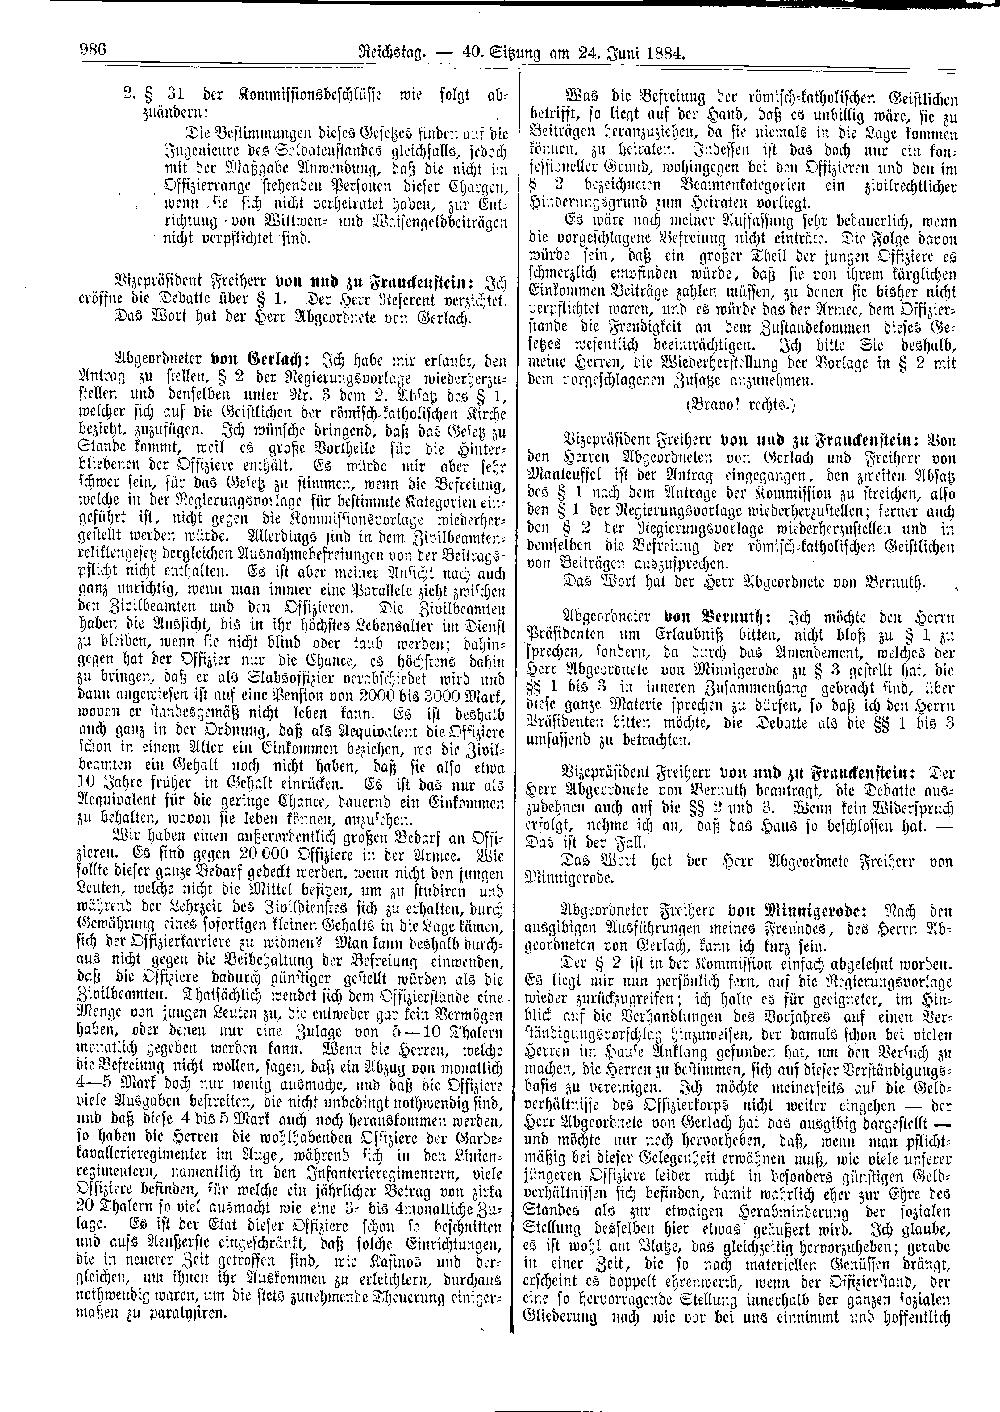 Scan of page 986